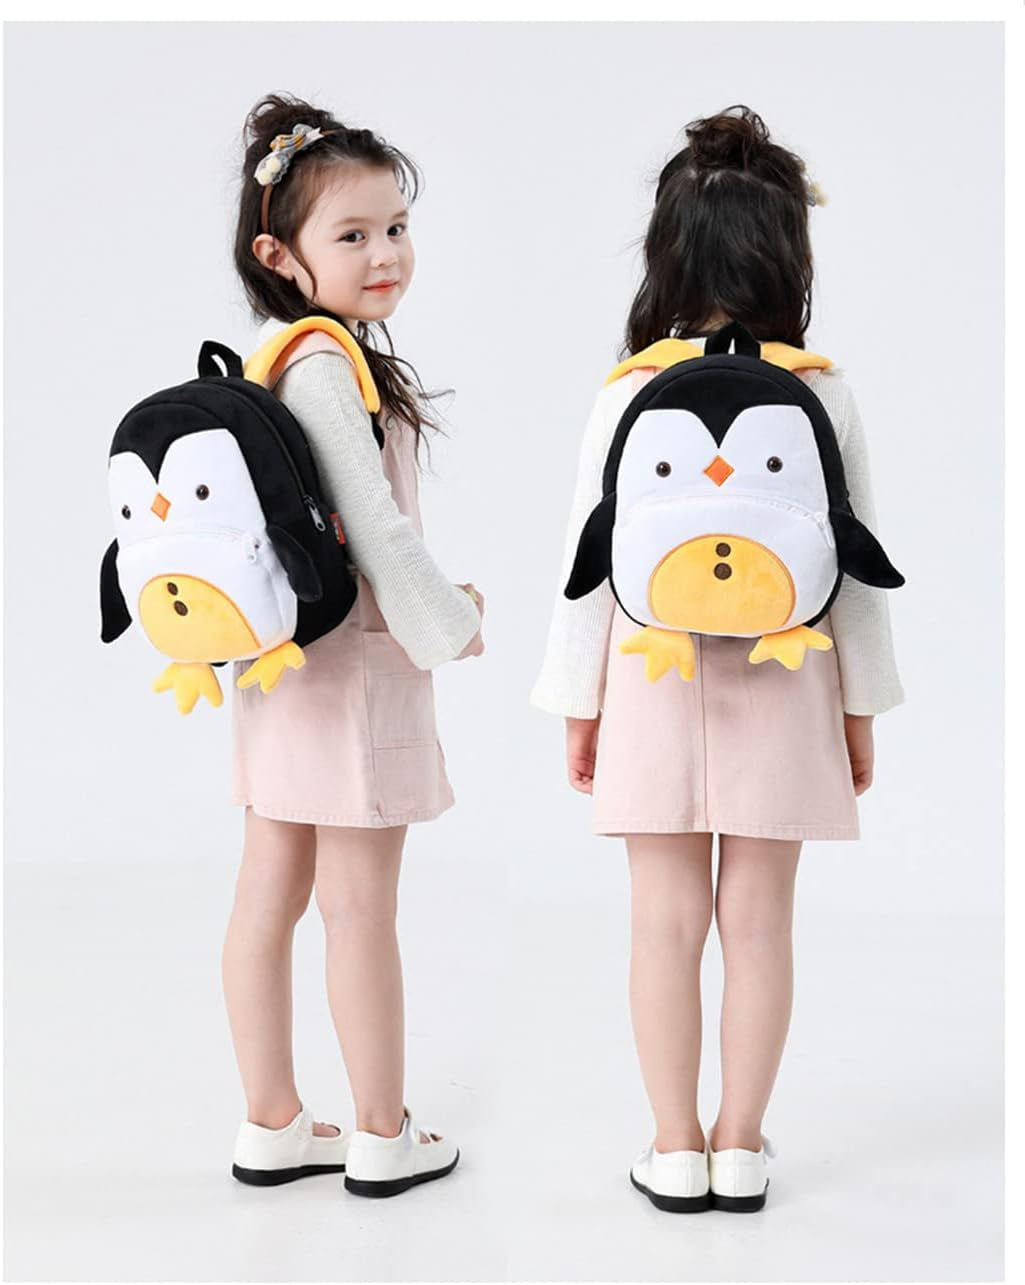 Toddler Backpack for Boys and Girls, Cute Soft Plush Animal Cartoon Mini Backpack Little for Kids 2-6 Years (Cat)